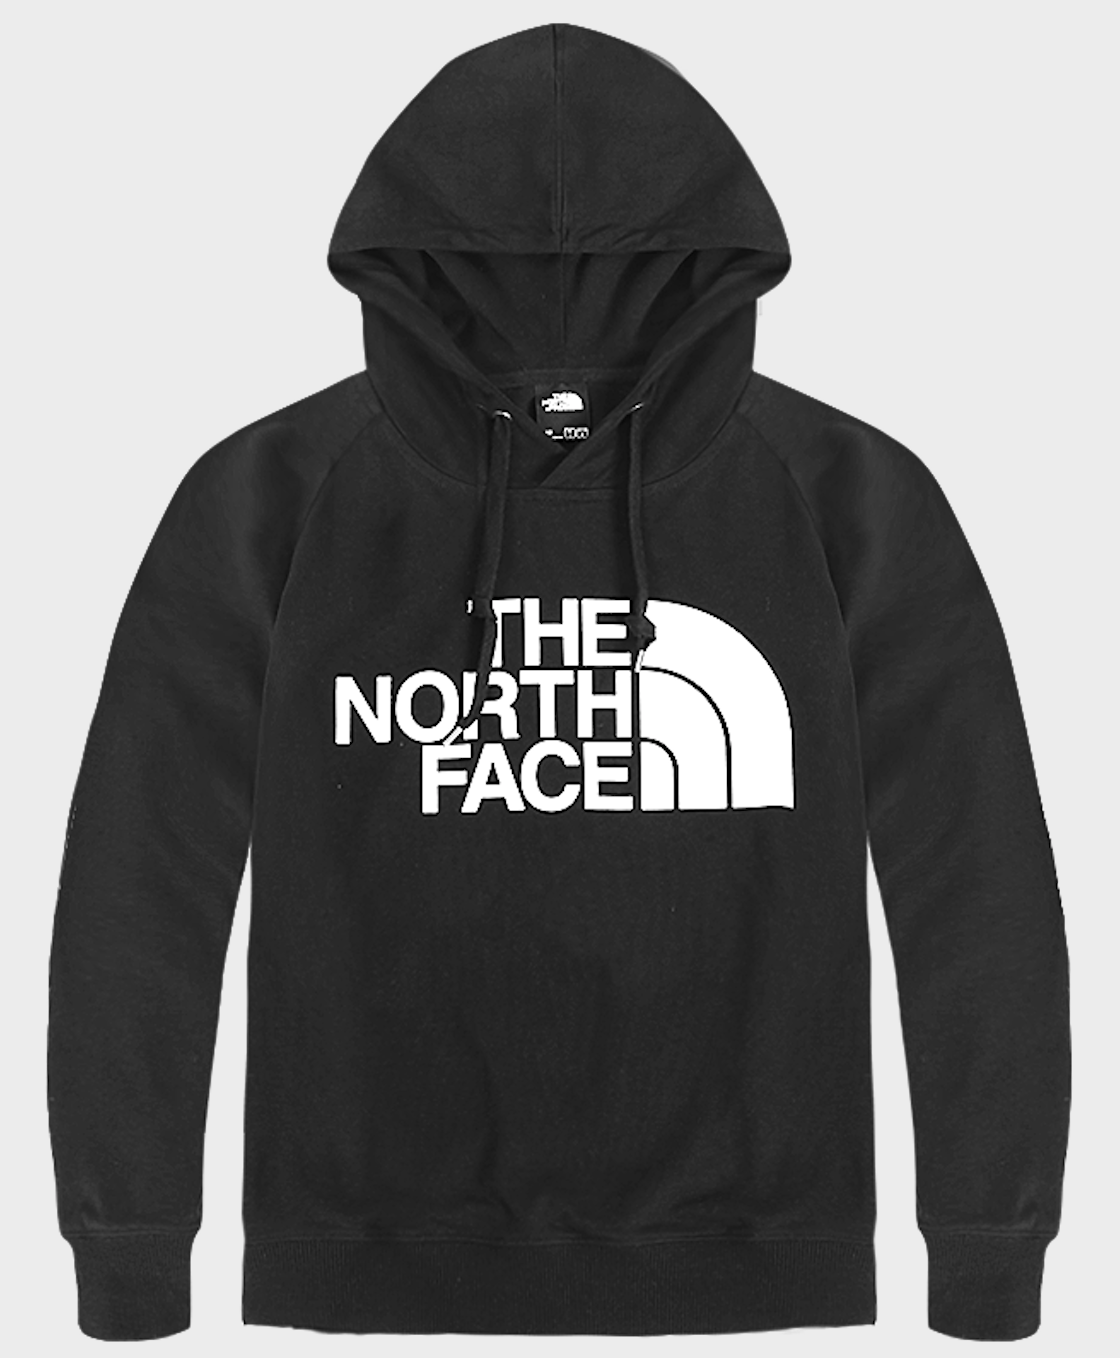 The North Face has a massive sale of 40% off jackets, bags, shoes